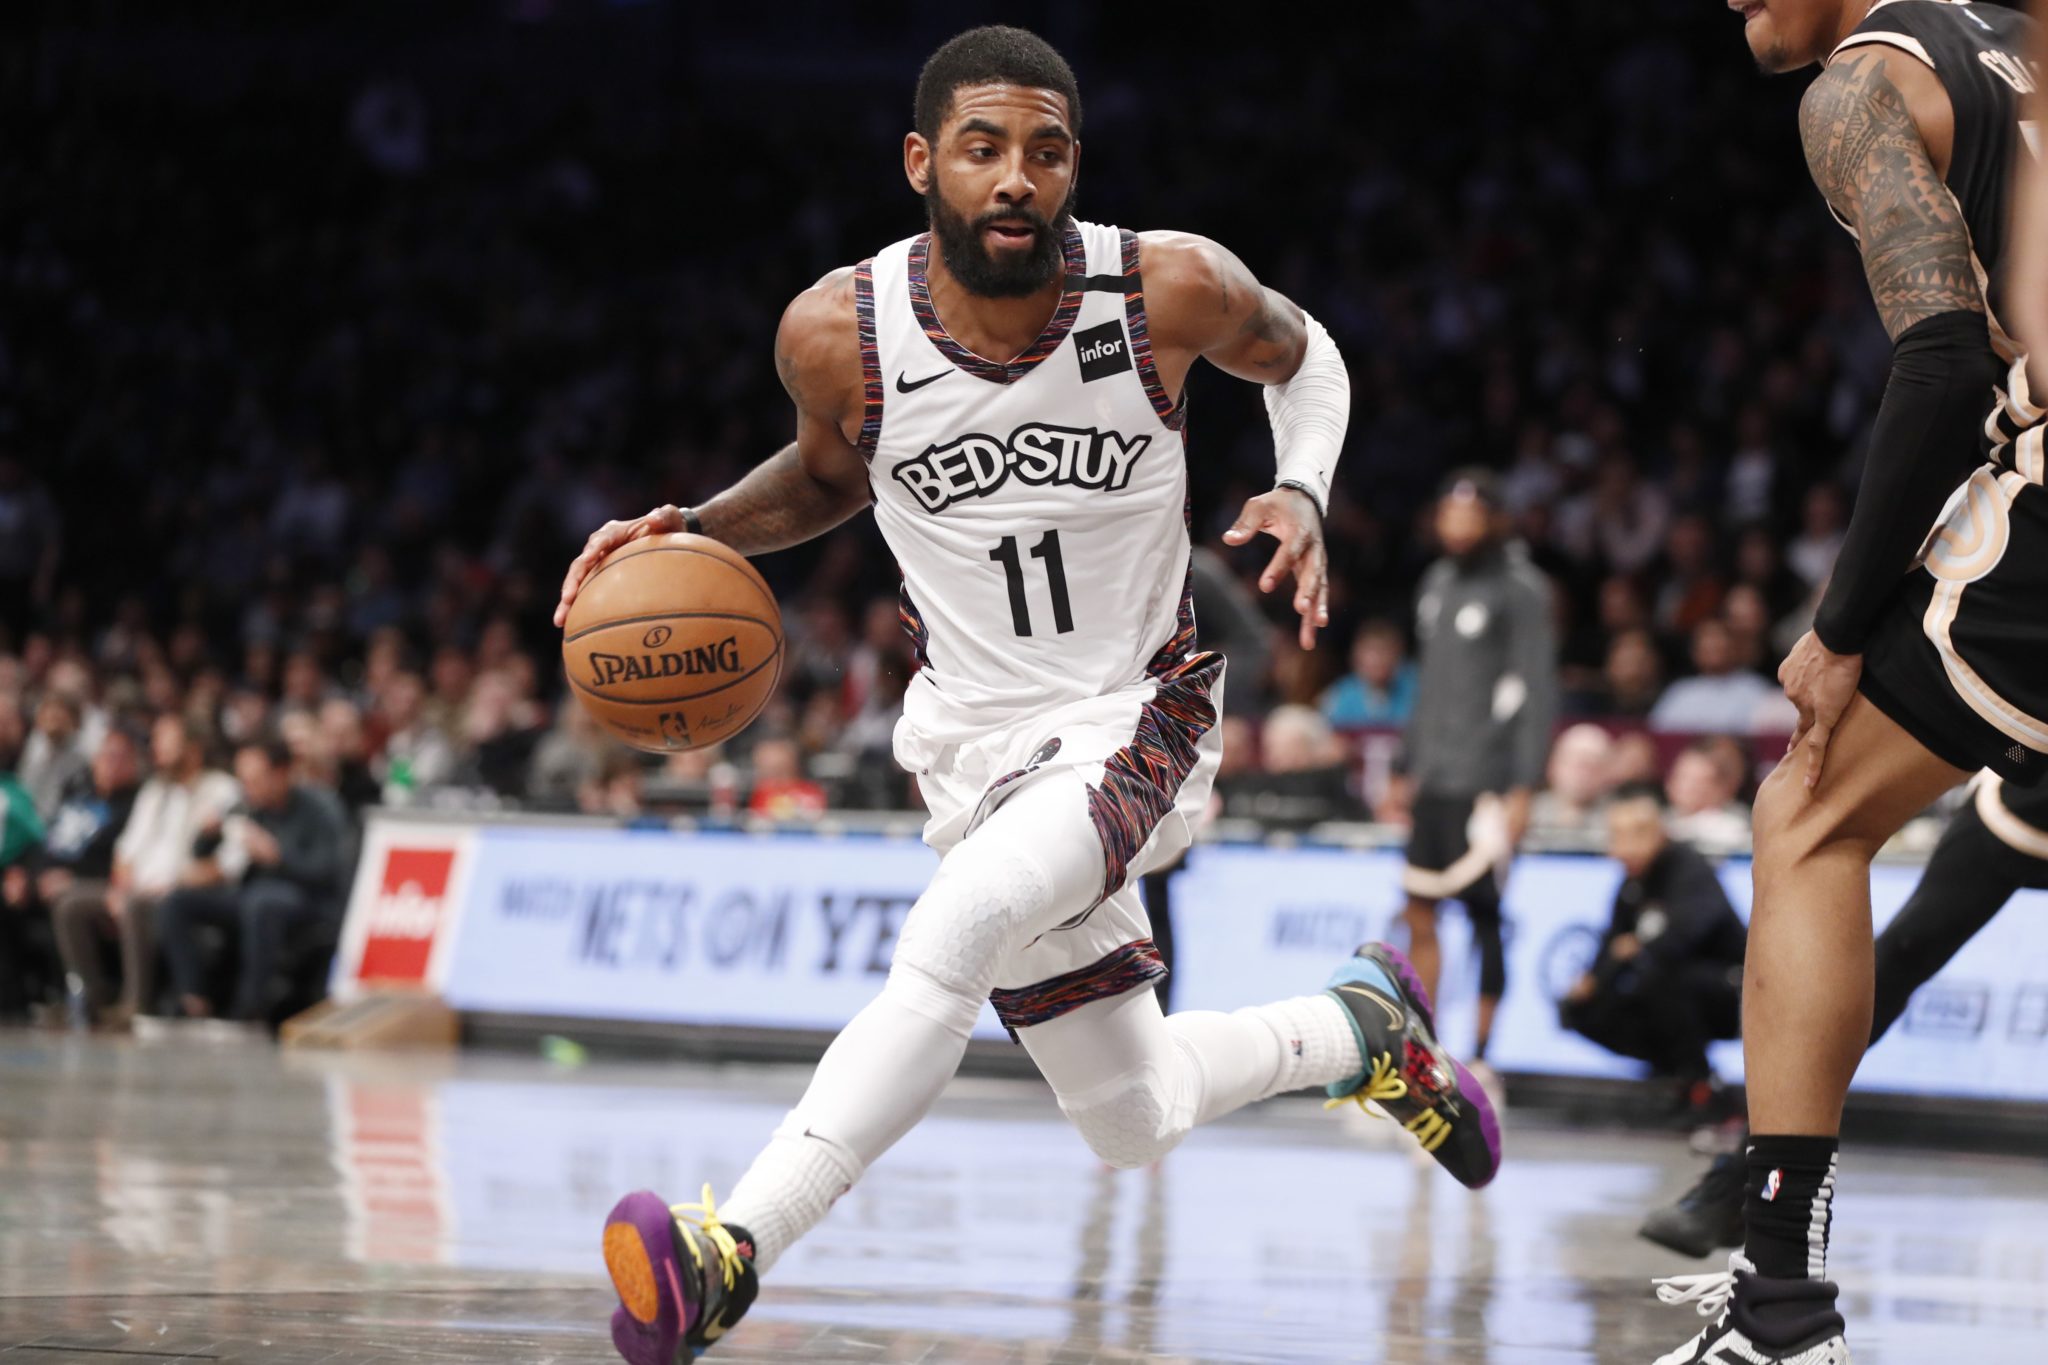 Kyrie Irving of the Nets